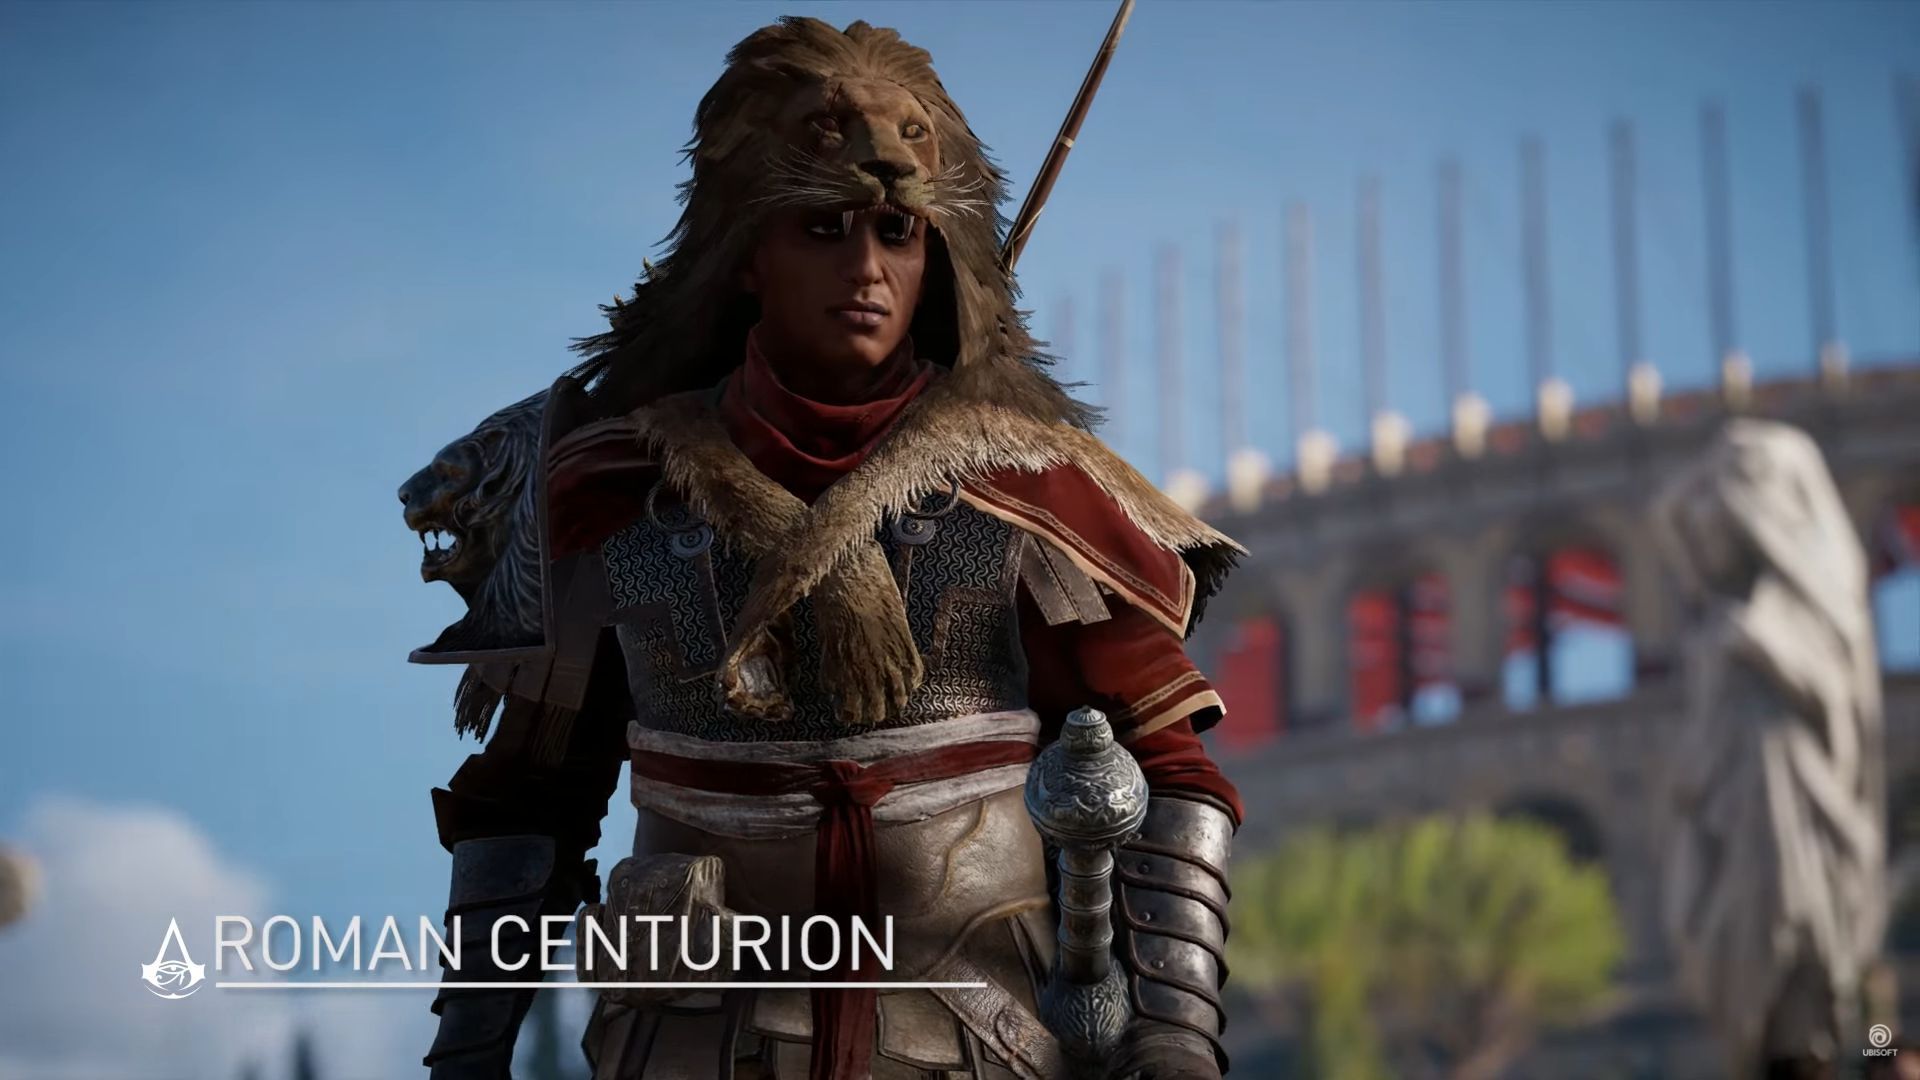 A Look At The Roman Centurion DLC For 'Assassin's Creed: Origins